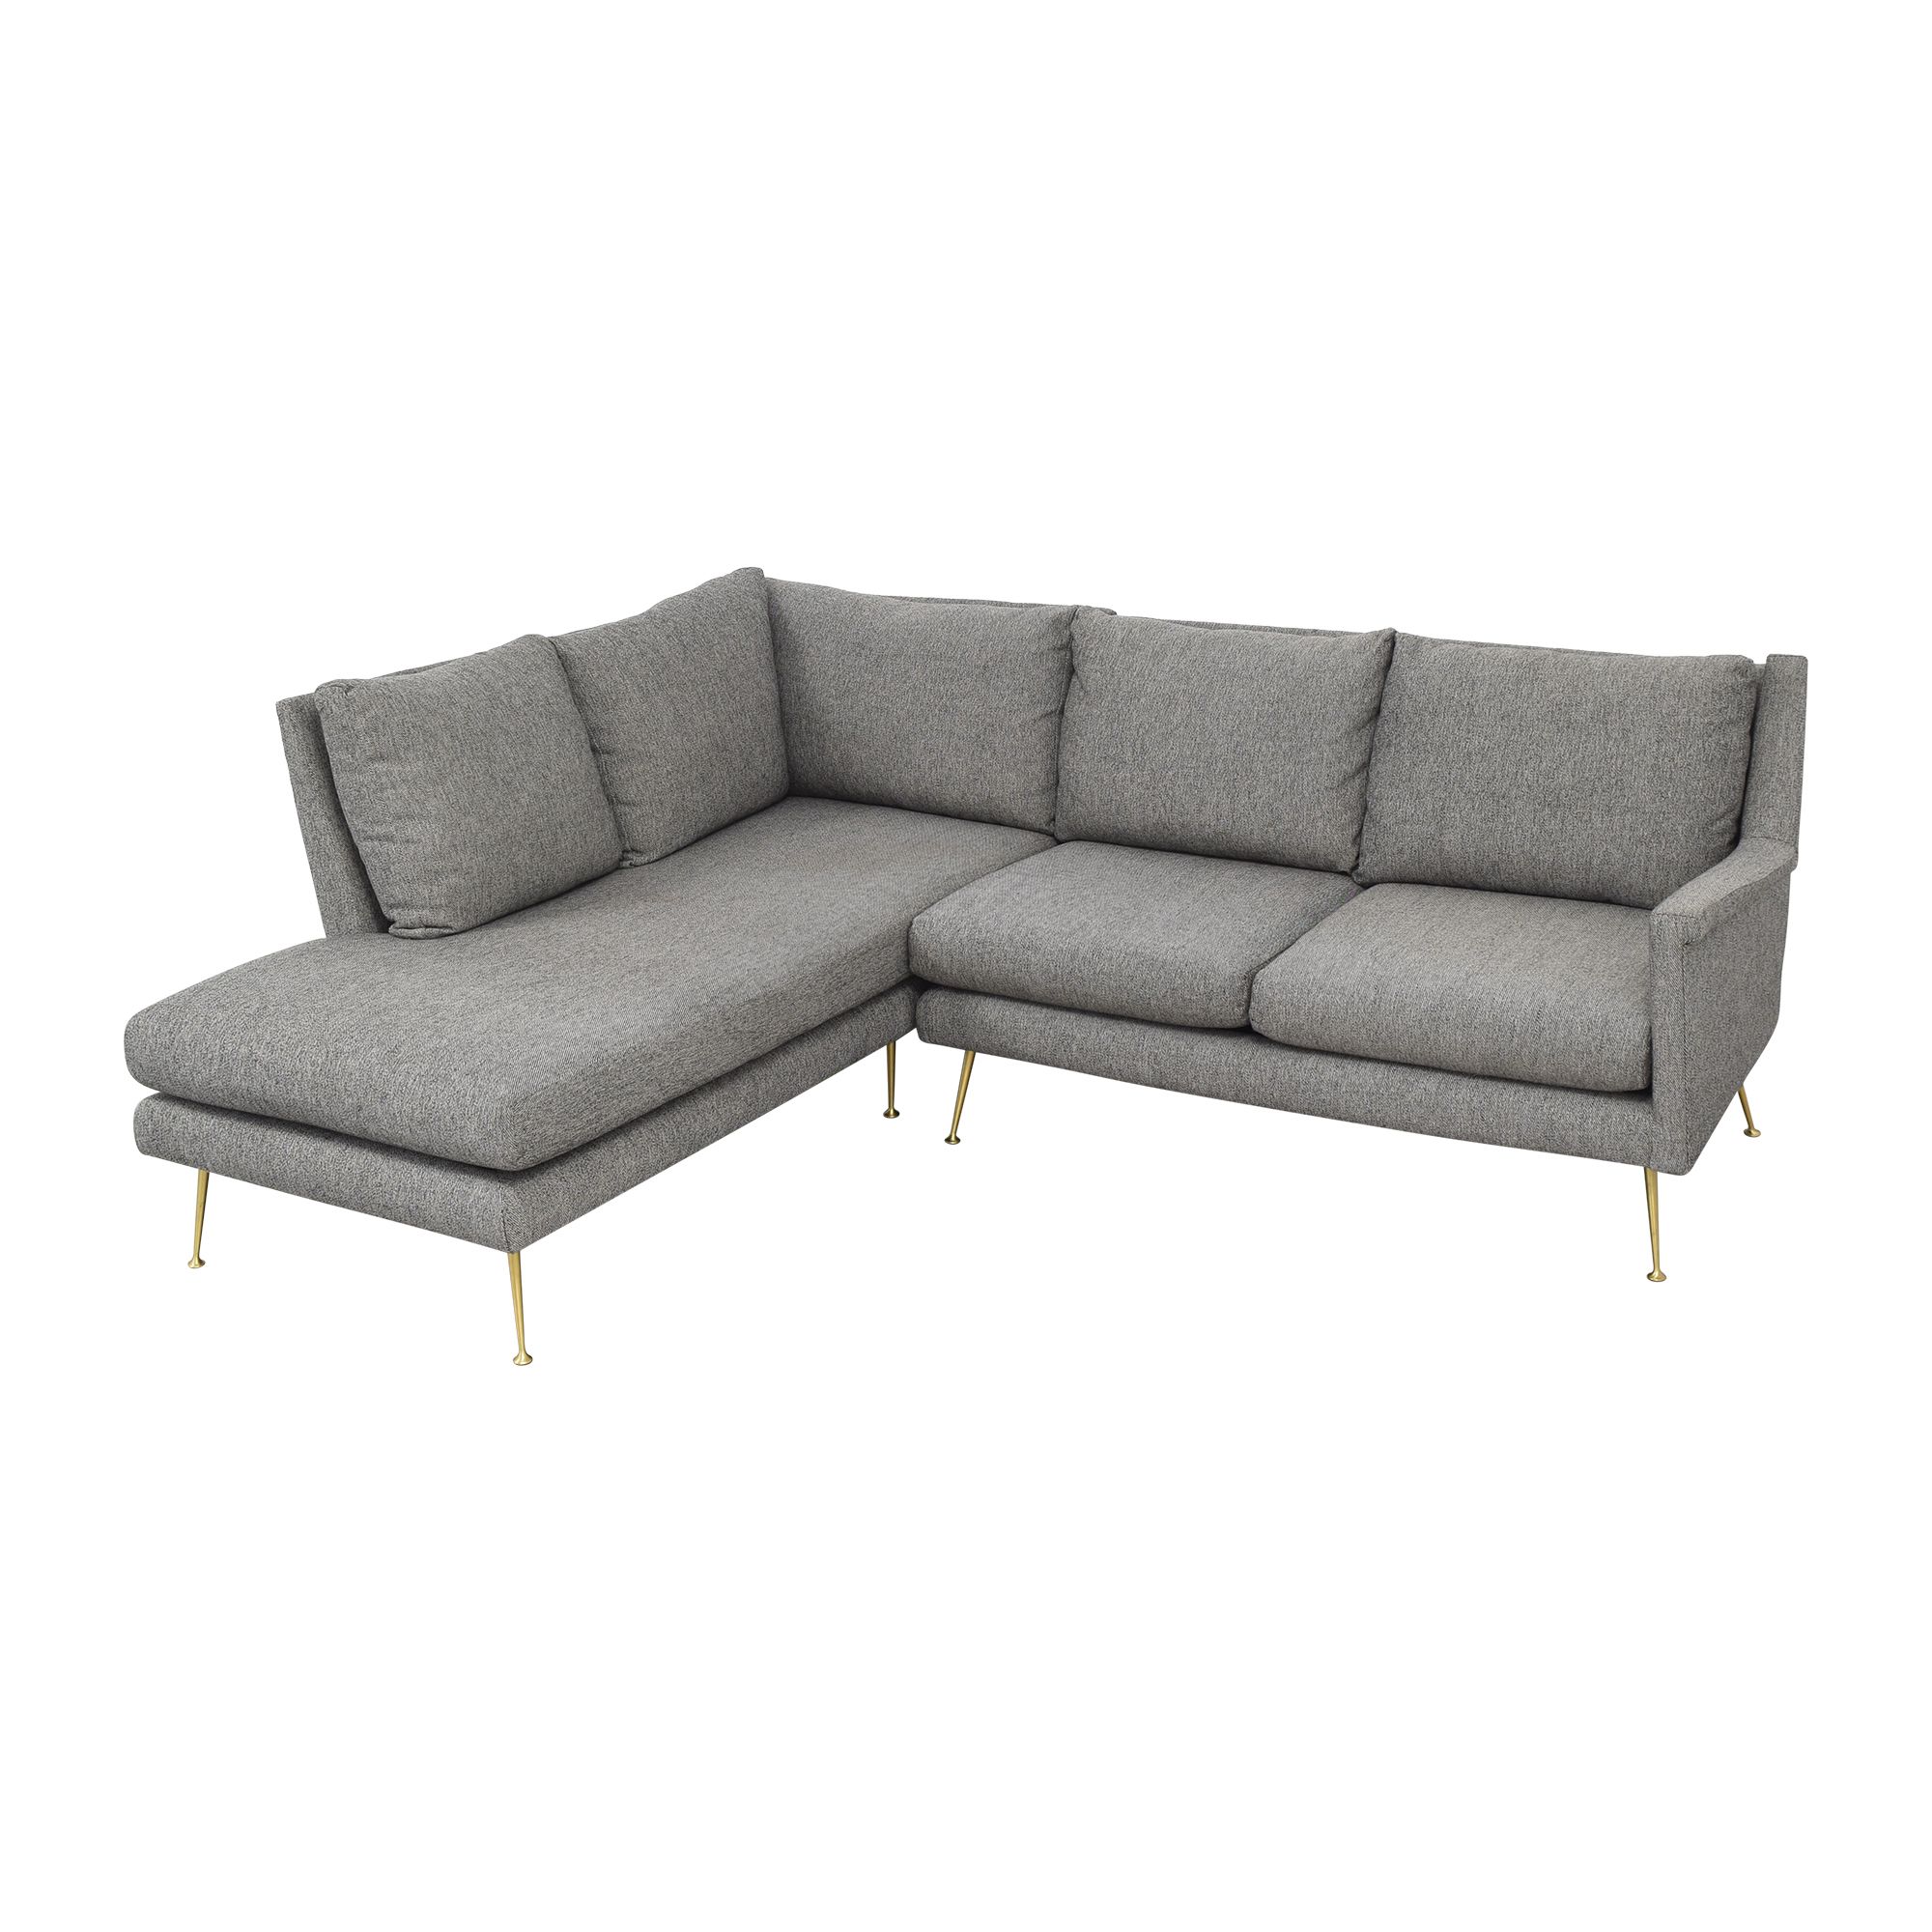 27% Off – West Elm West Elm Carlo Mid Century 2 Piece Pertaining To Elm Grande Ii 2 Piece Sectionals (View 4 of 15)